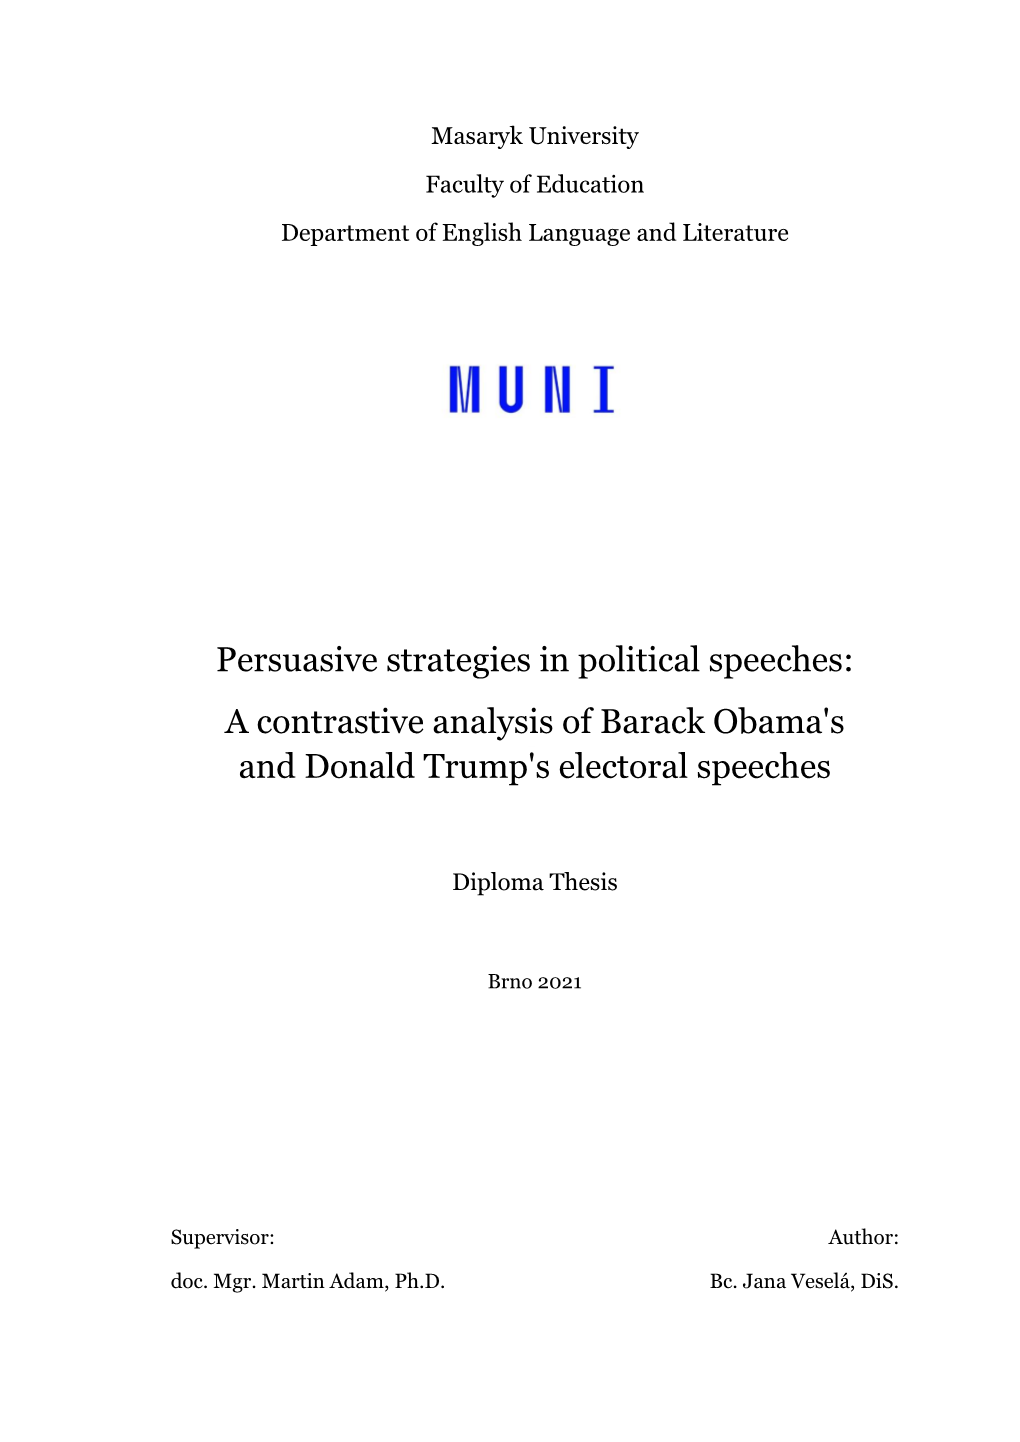 Persuasive Strategies in Political Speeches: a Contrastive Analysis of Barack Obama's and Donald Trump's Electoral Speeches